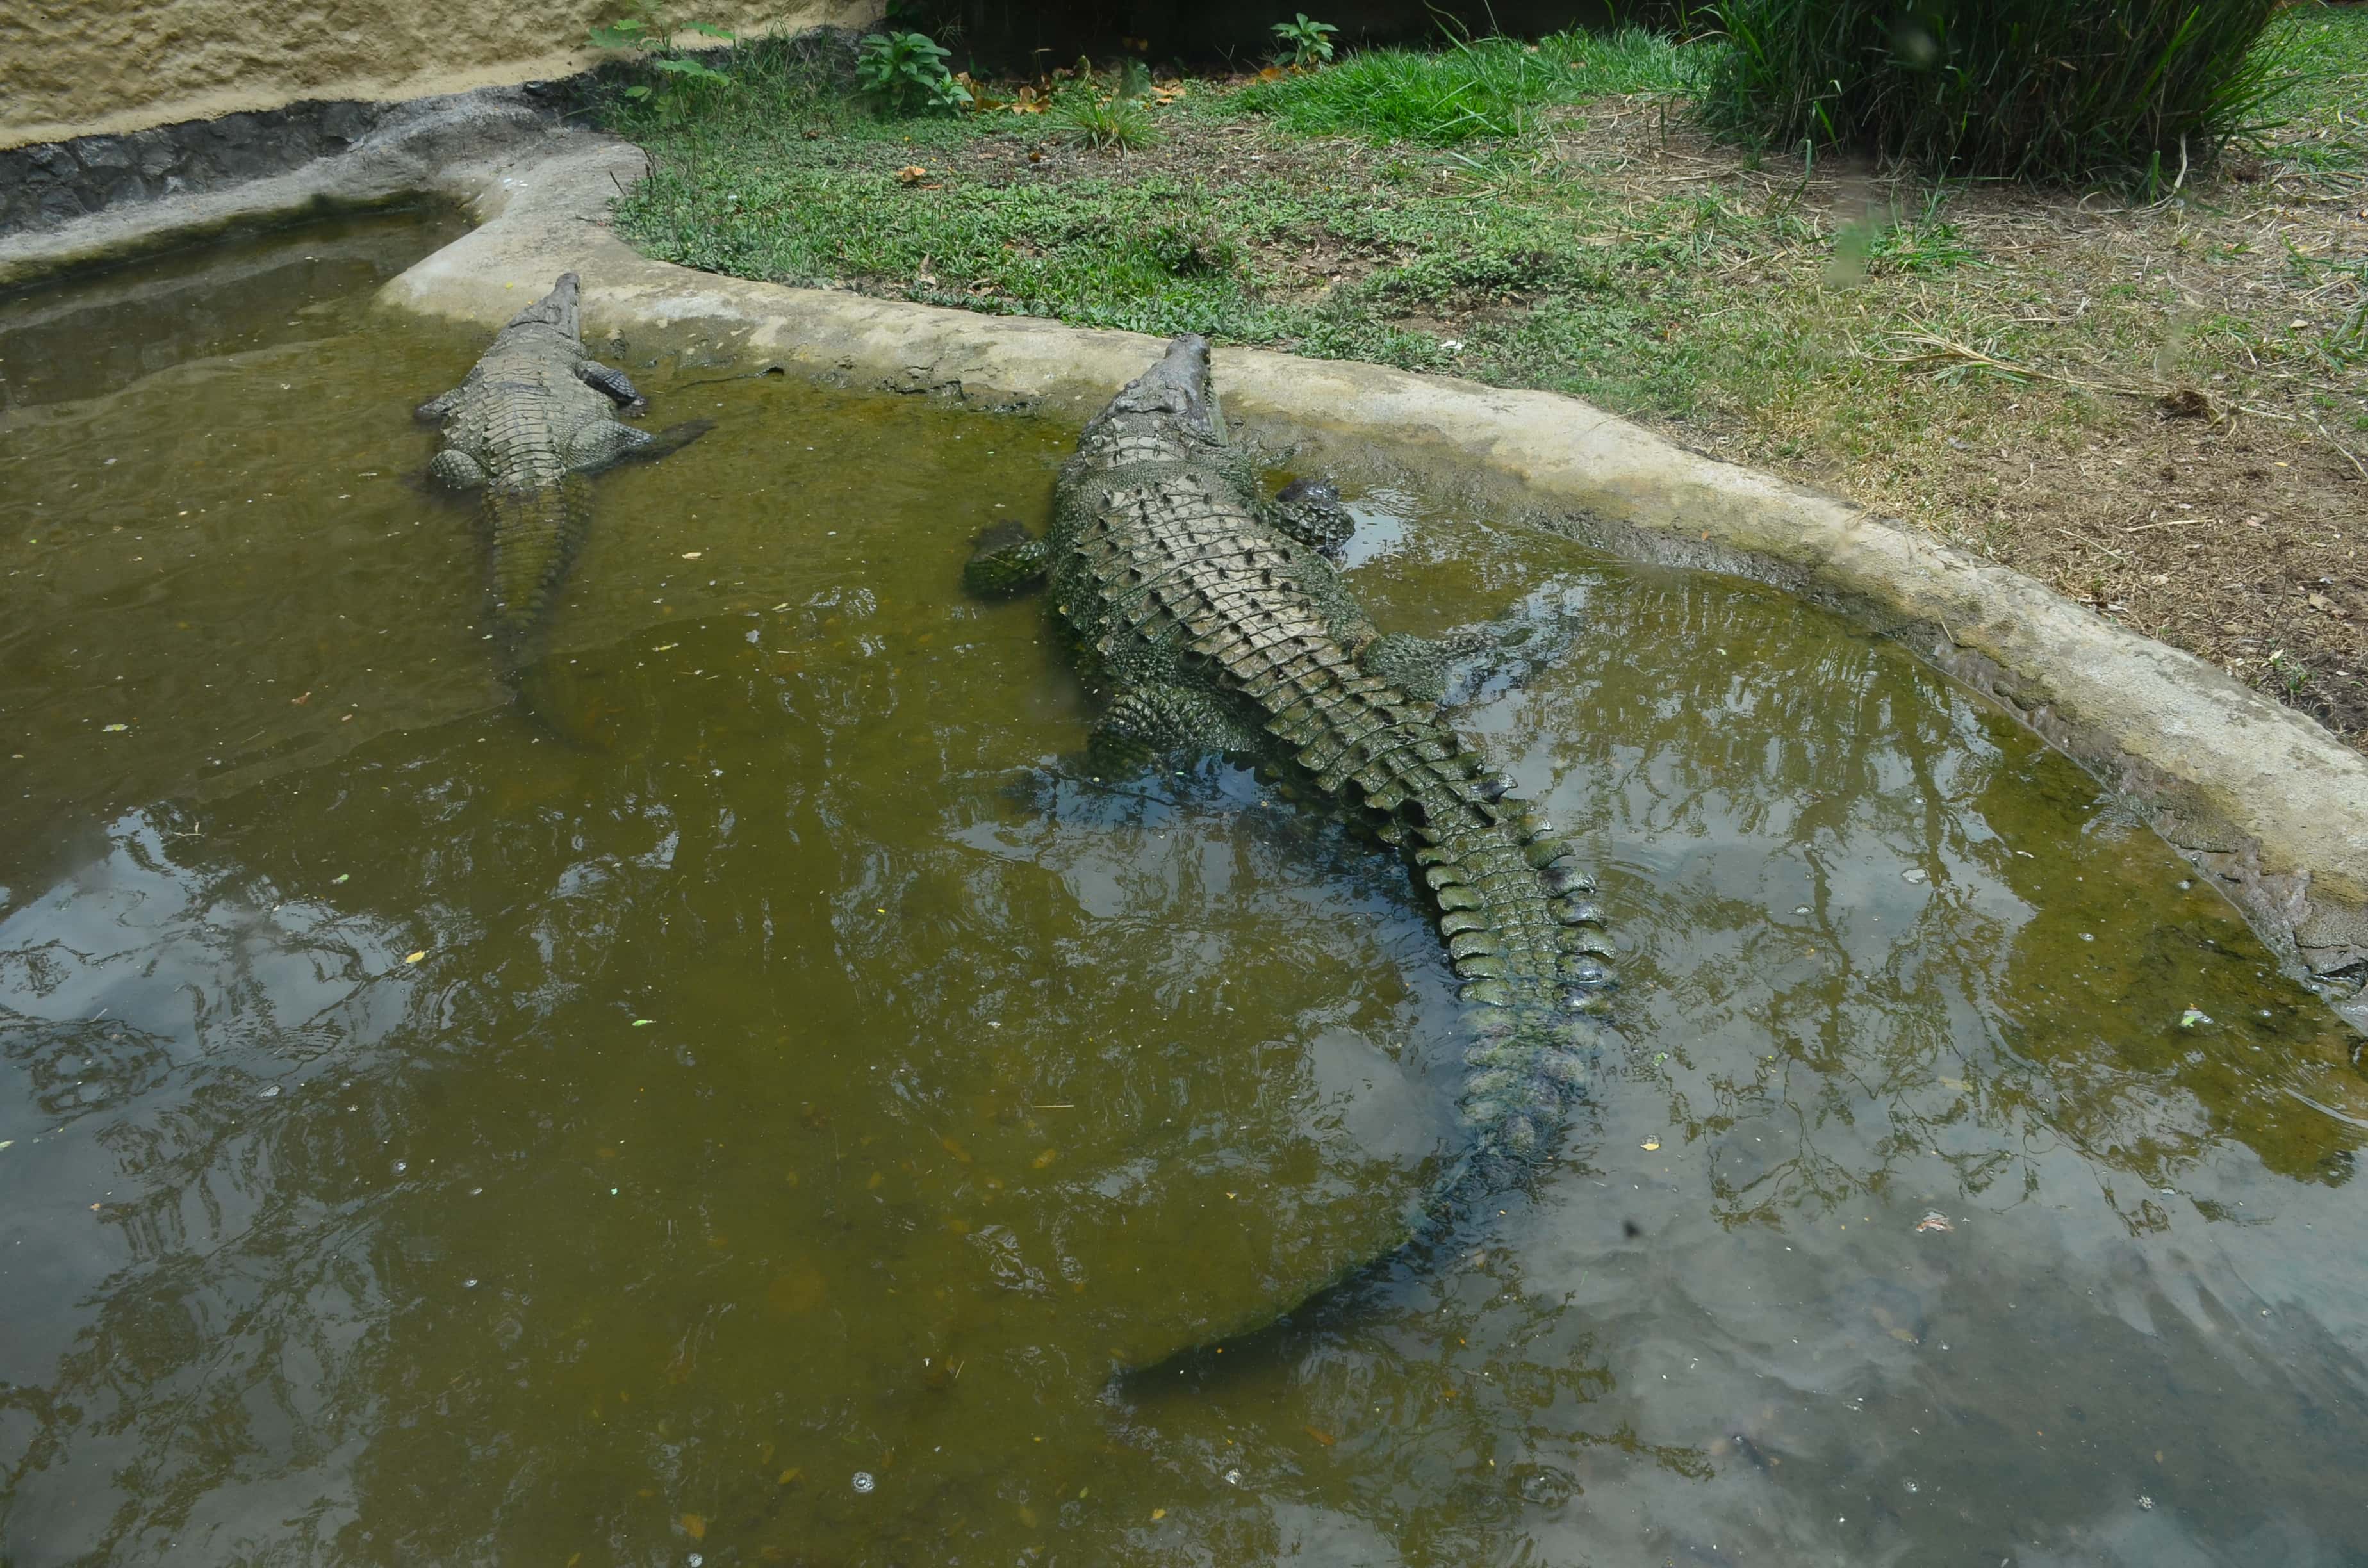 Crocodile at the Cali Zoo in Colombia